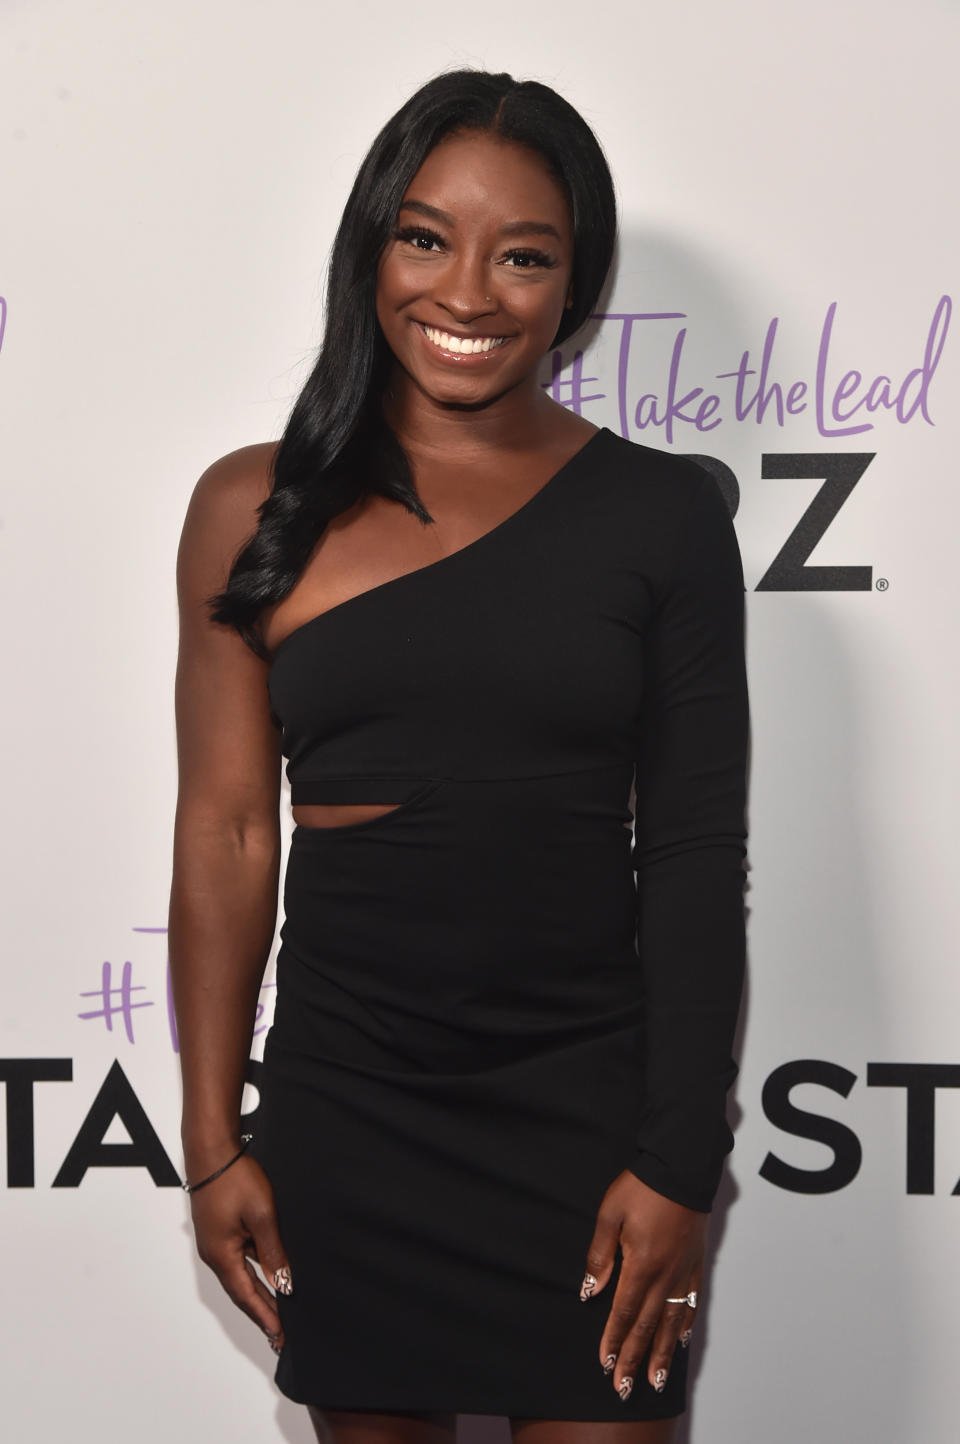 WEST HOLLYWOOD, CALIFORNIA - MAY 19: Simone Biles attends The Inaugural STARZ #TakeTheLead Summit at The West Hollywood EDITION on May 19, 2022 in West Hollywood, California. (Photo by Alberto E. Rodriguez/Getty Images for STARZ)